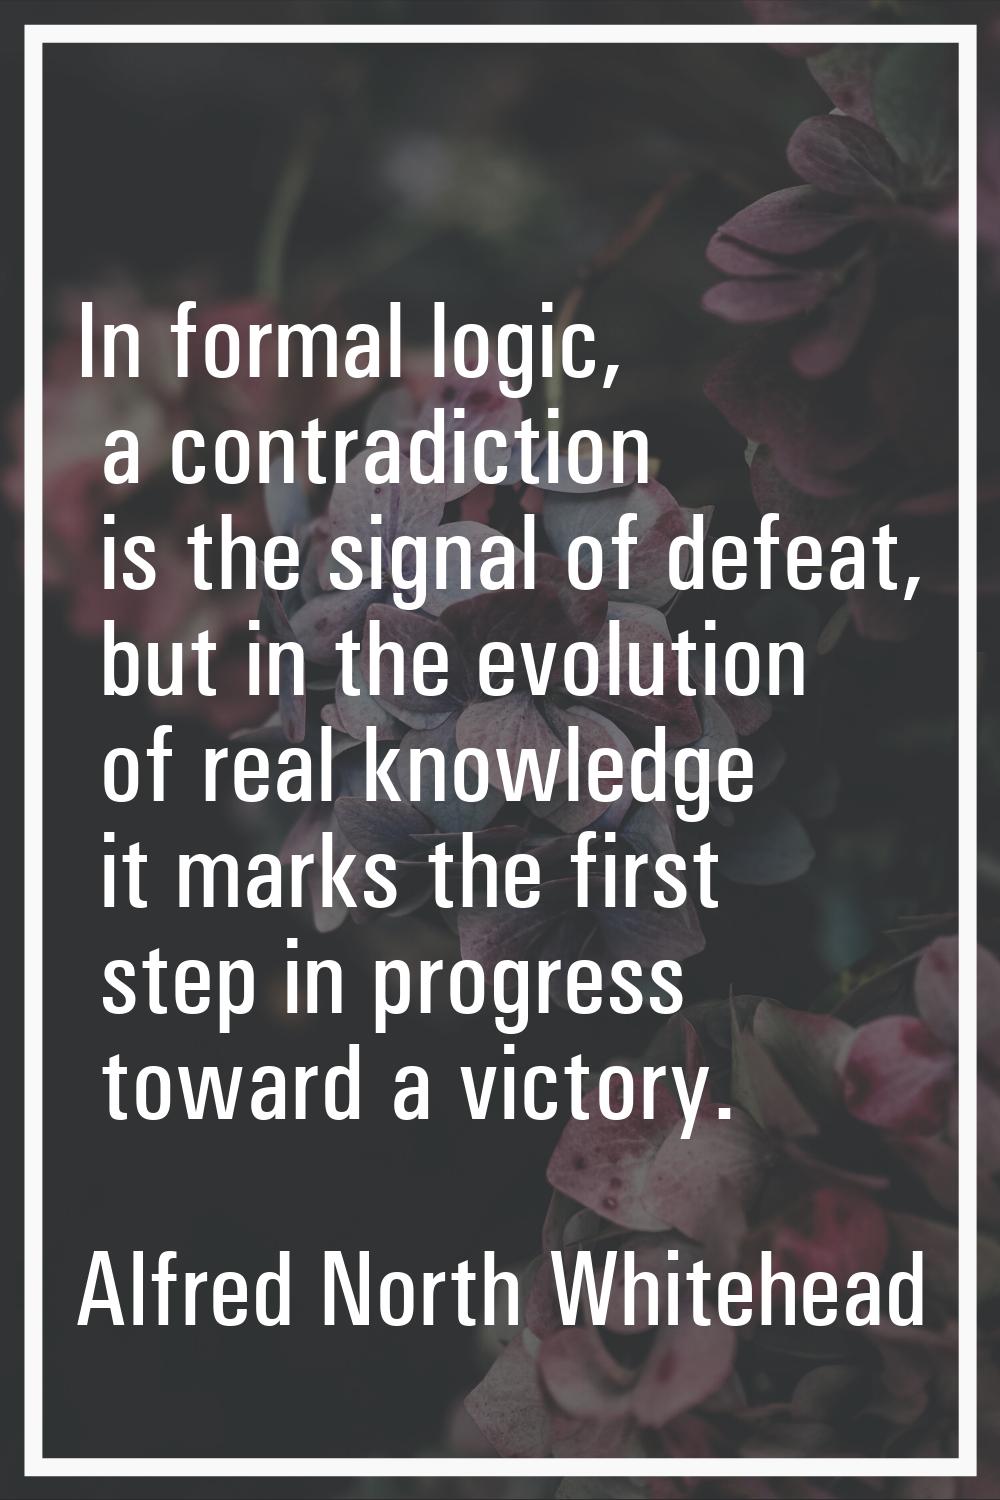 In formal logic, a contradiction is the signal of defeat, but in the evolution of real knowledge it